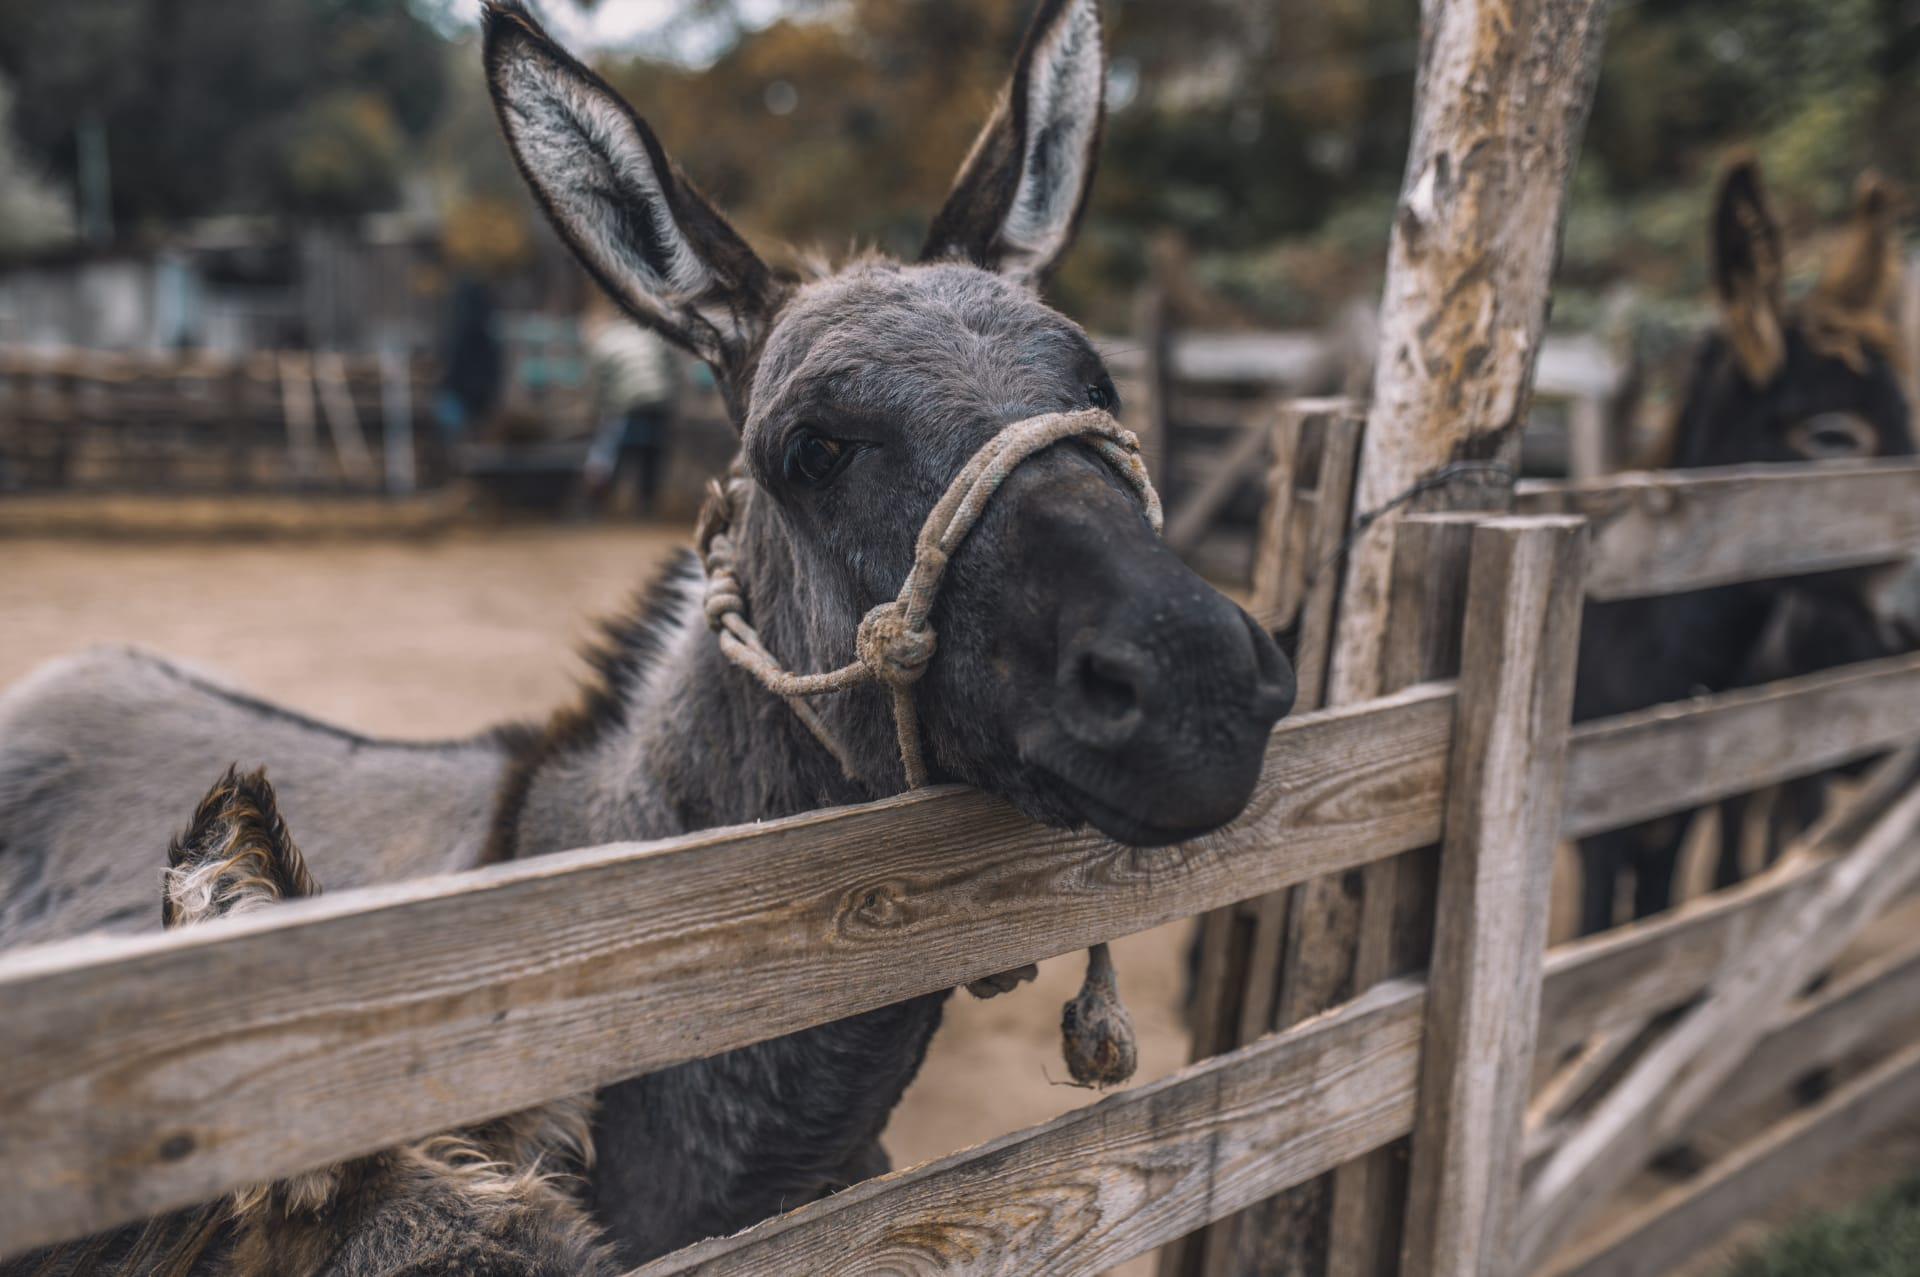 Donkey pictures